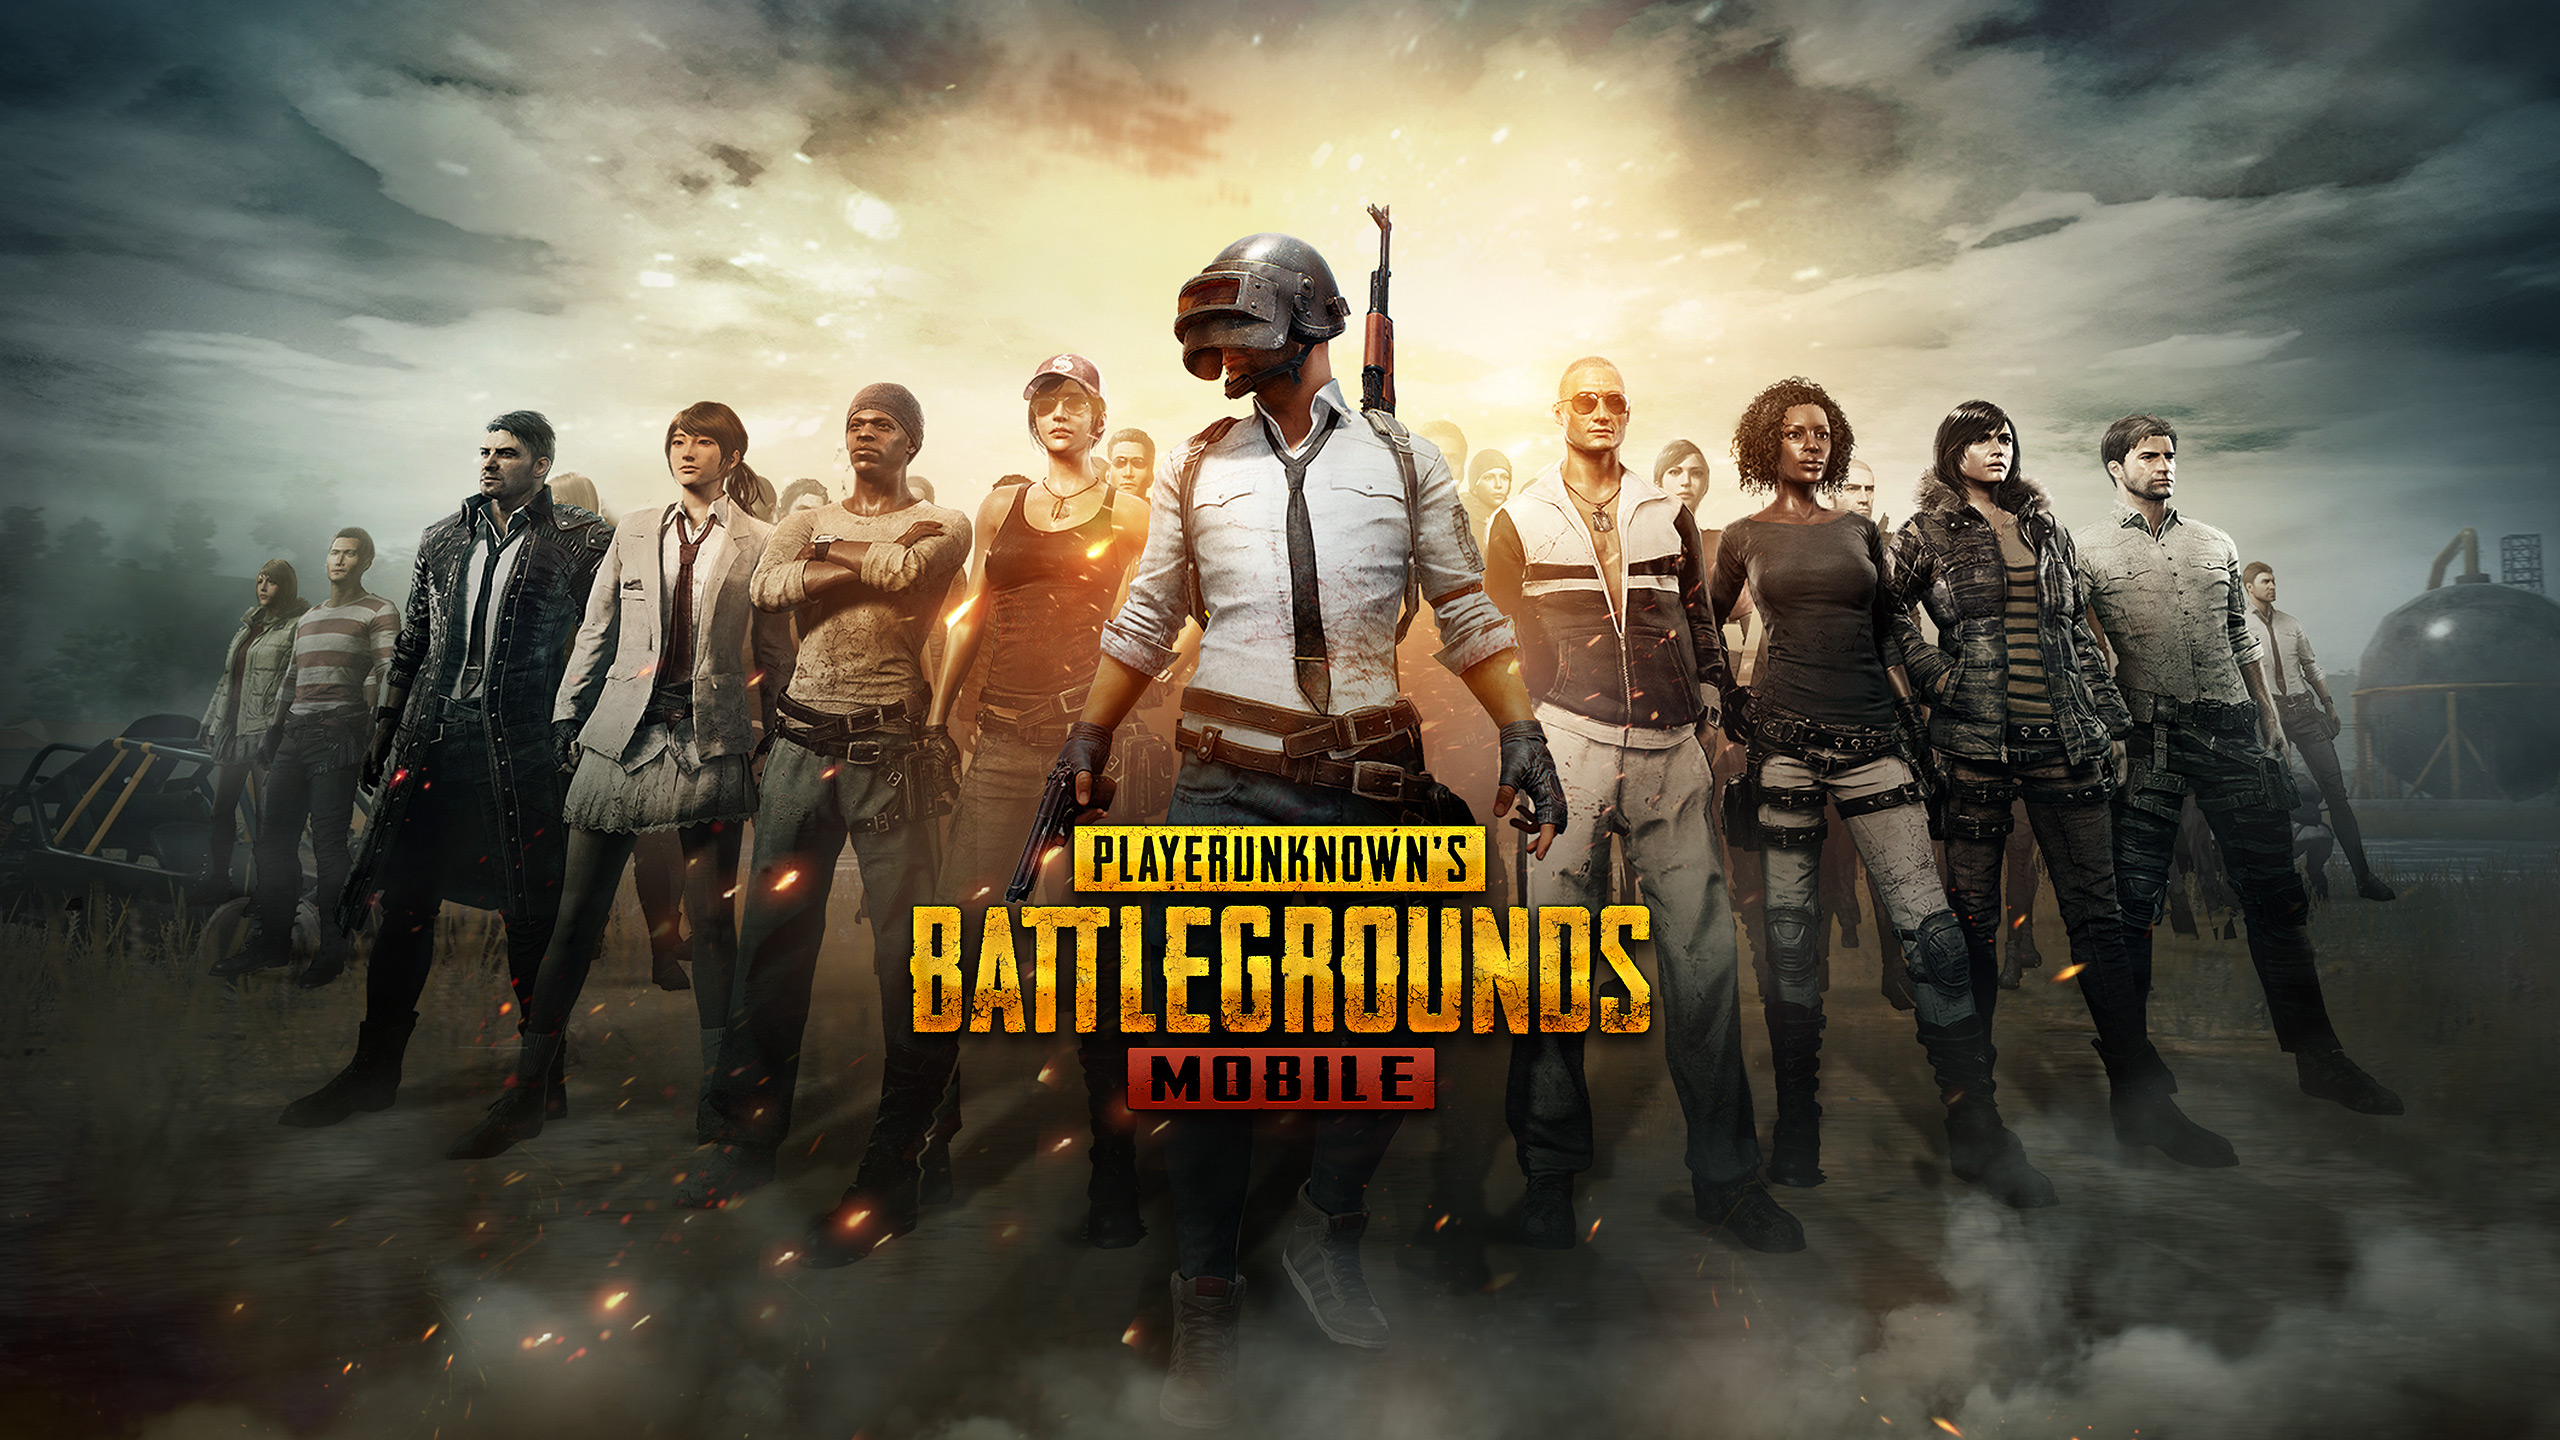 PUBG Mobile rolls out “gameplay management” system for under-18s